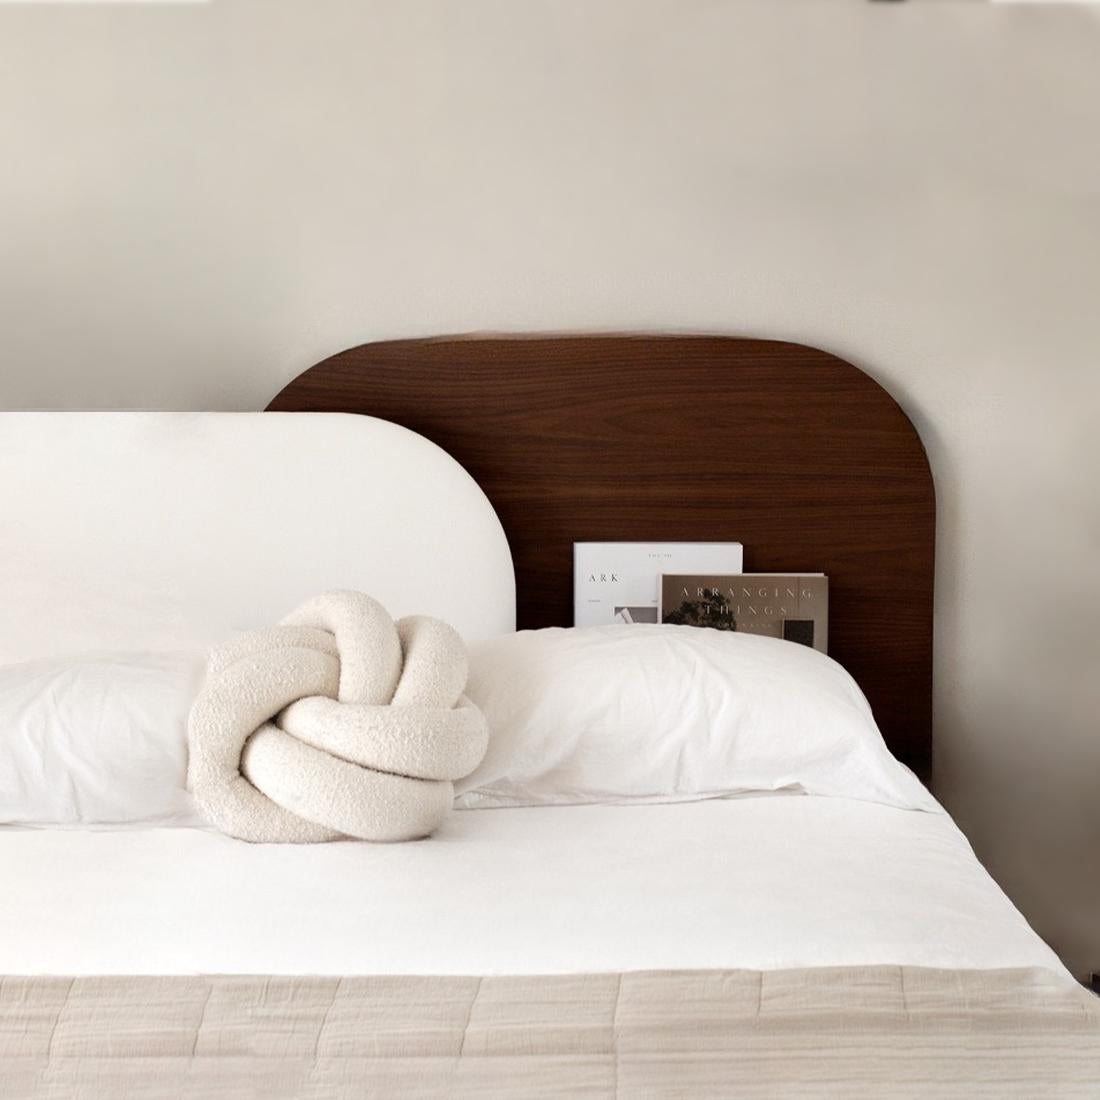 Our unique and best-selling ALBA Collection expands with the introduction of our ALBA Headboard. A piece that follows the exceptional design of its collection and perfectly complements our Alba Bedside Tables and Shelves.
The word ALBA means “dawn